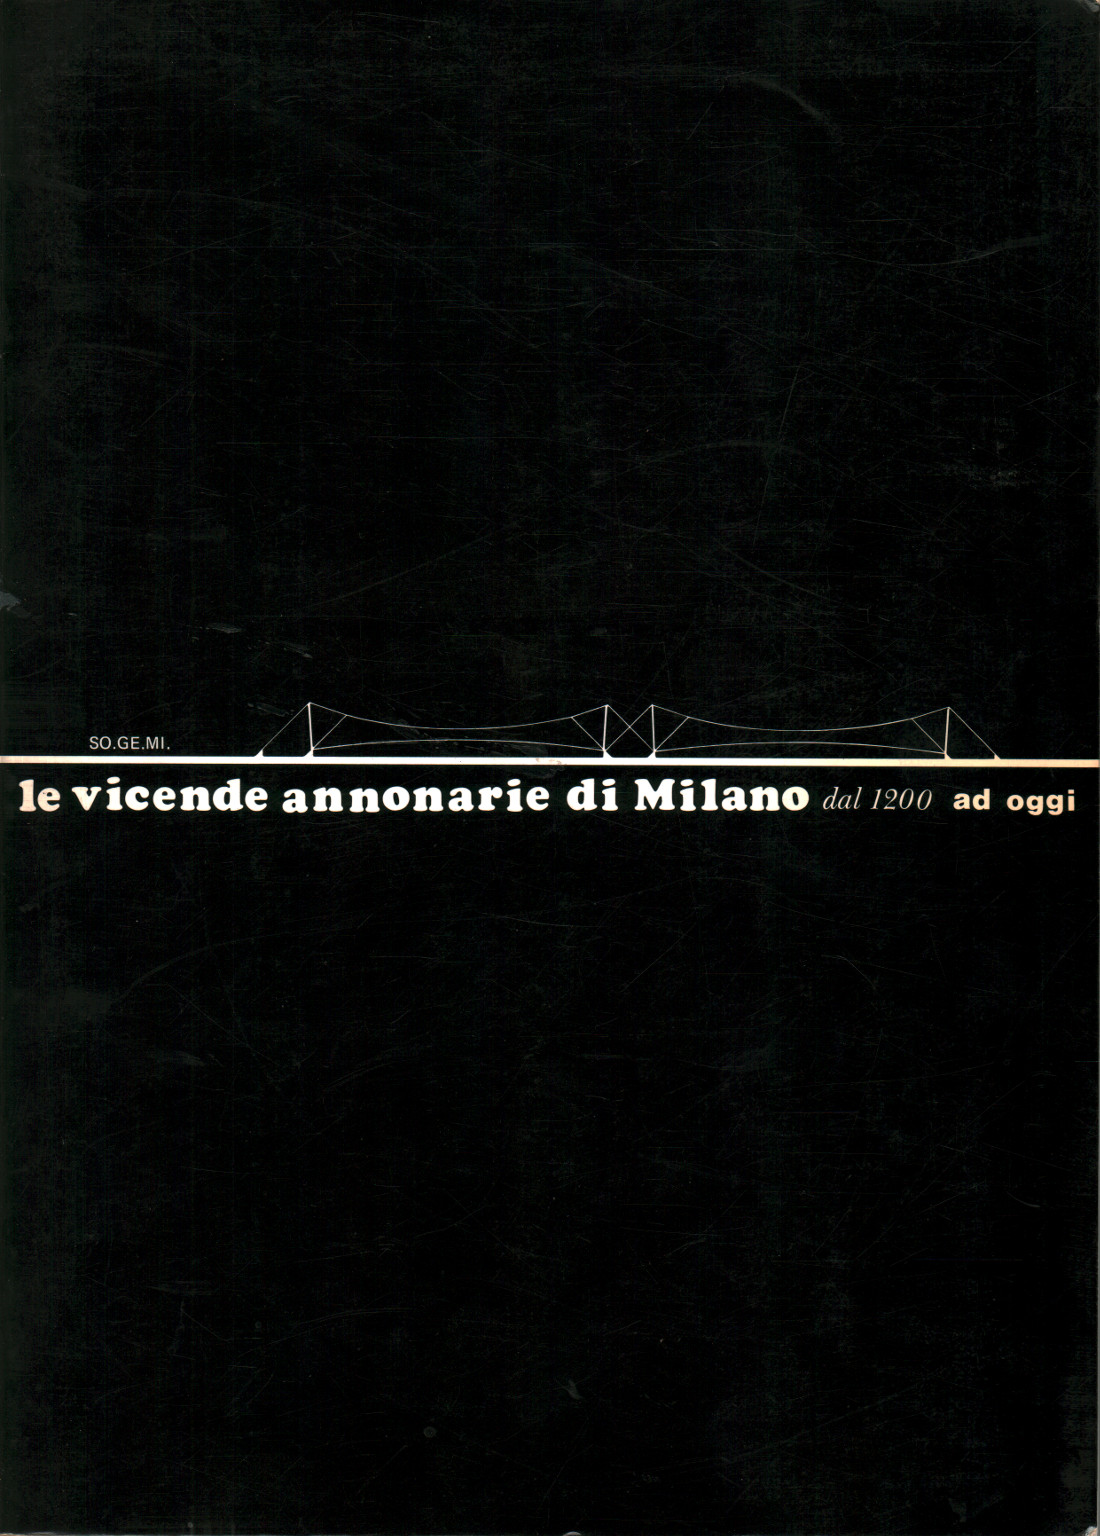 The events annotarie of Milan from 1200 to today, s.a.